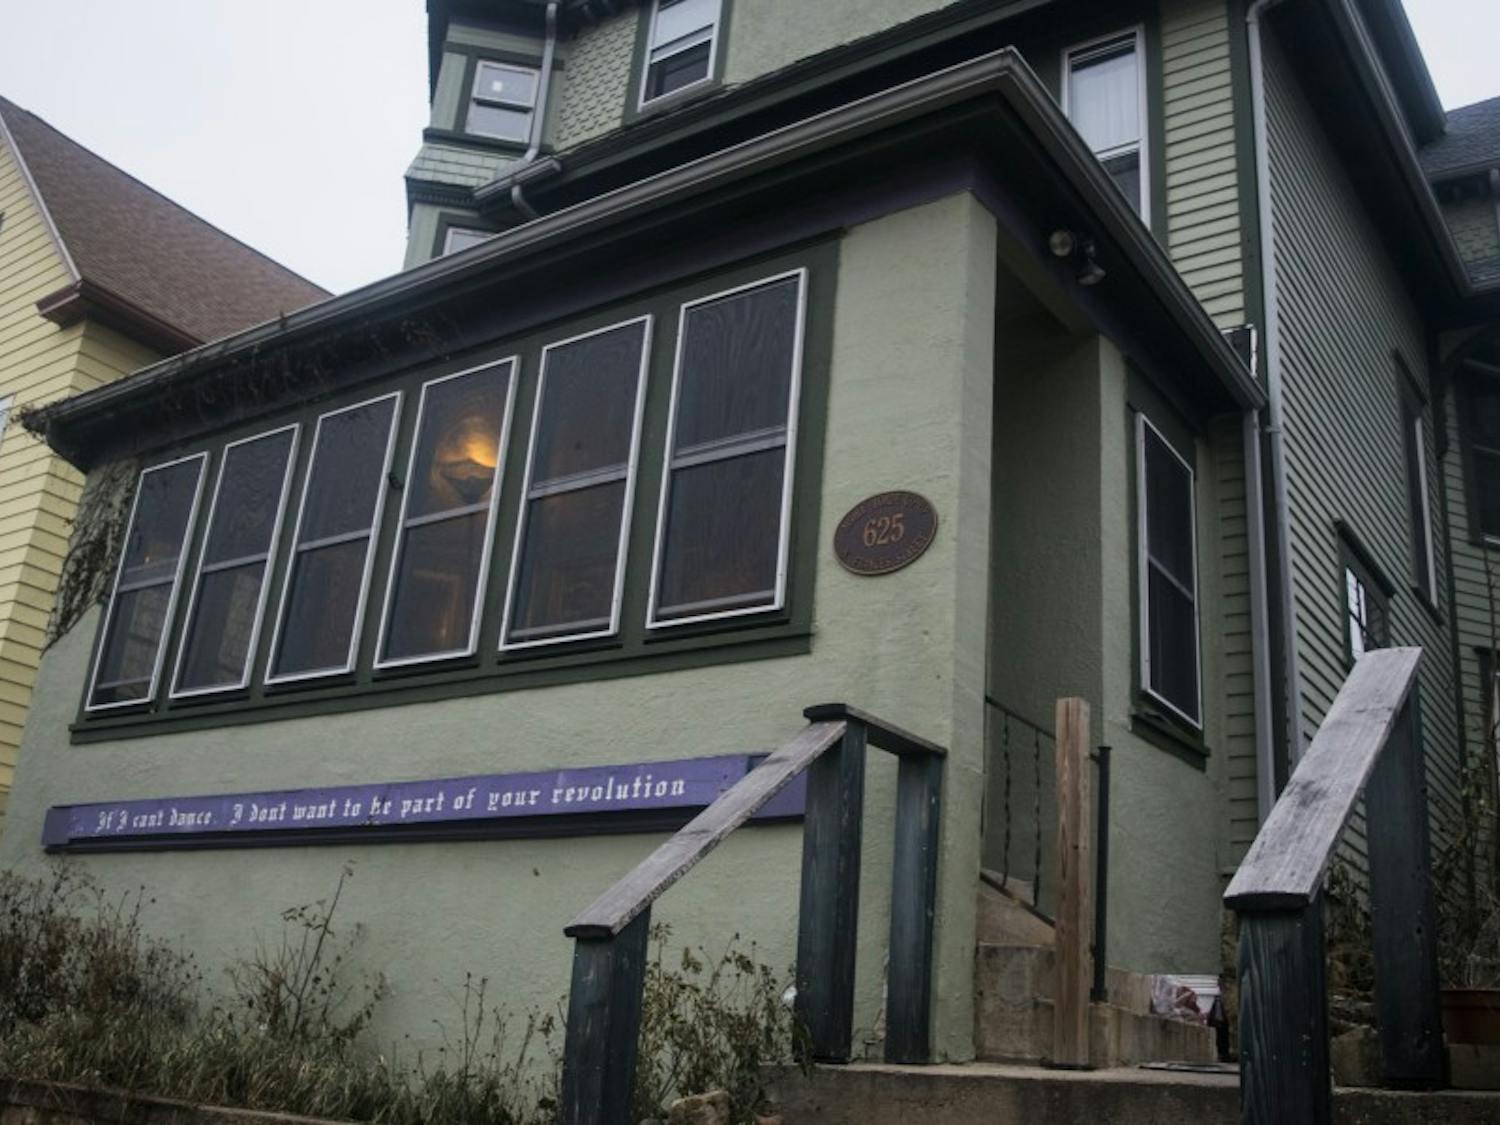 The number of residents of the Audre Lorde co-op, which can house 15 Queer and Transgender People of Color, shrank to one lone member following issues within the Madison Community Cooperative organization.